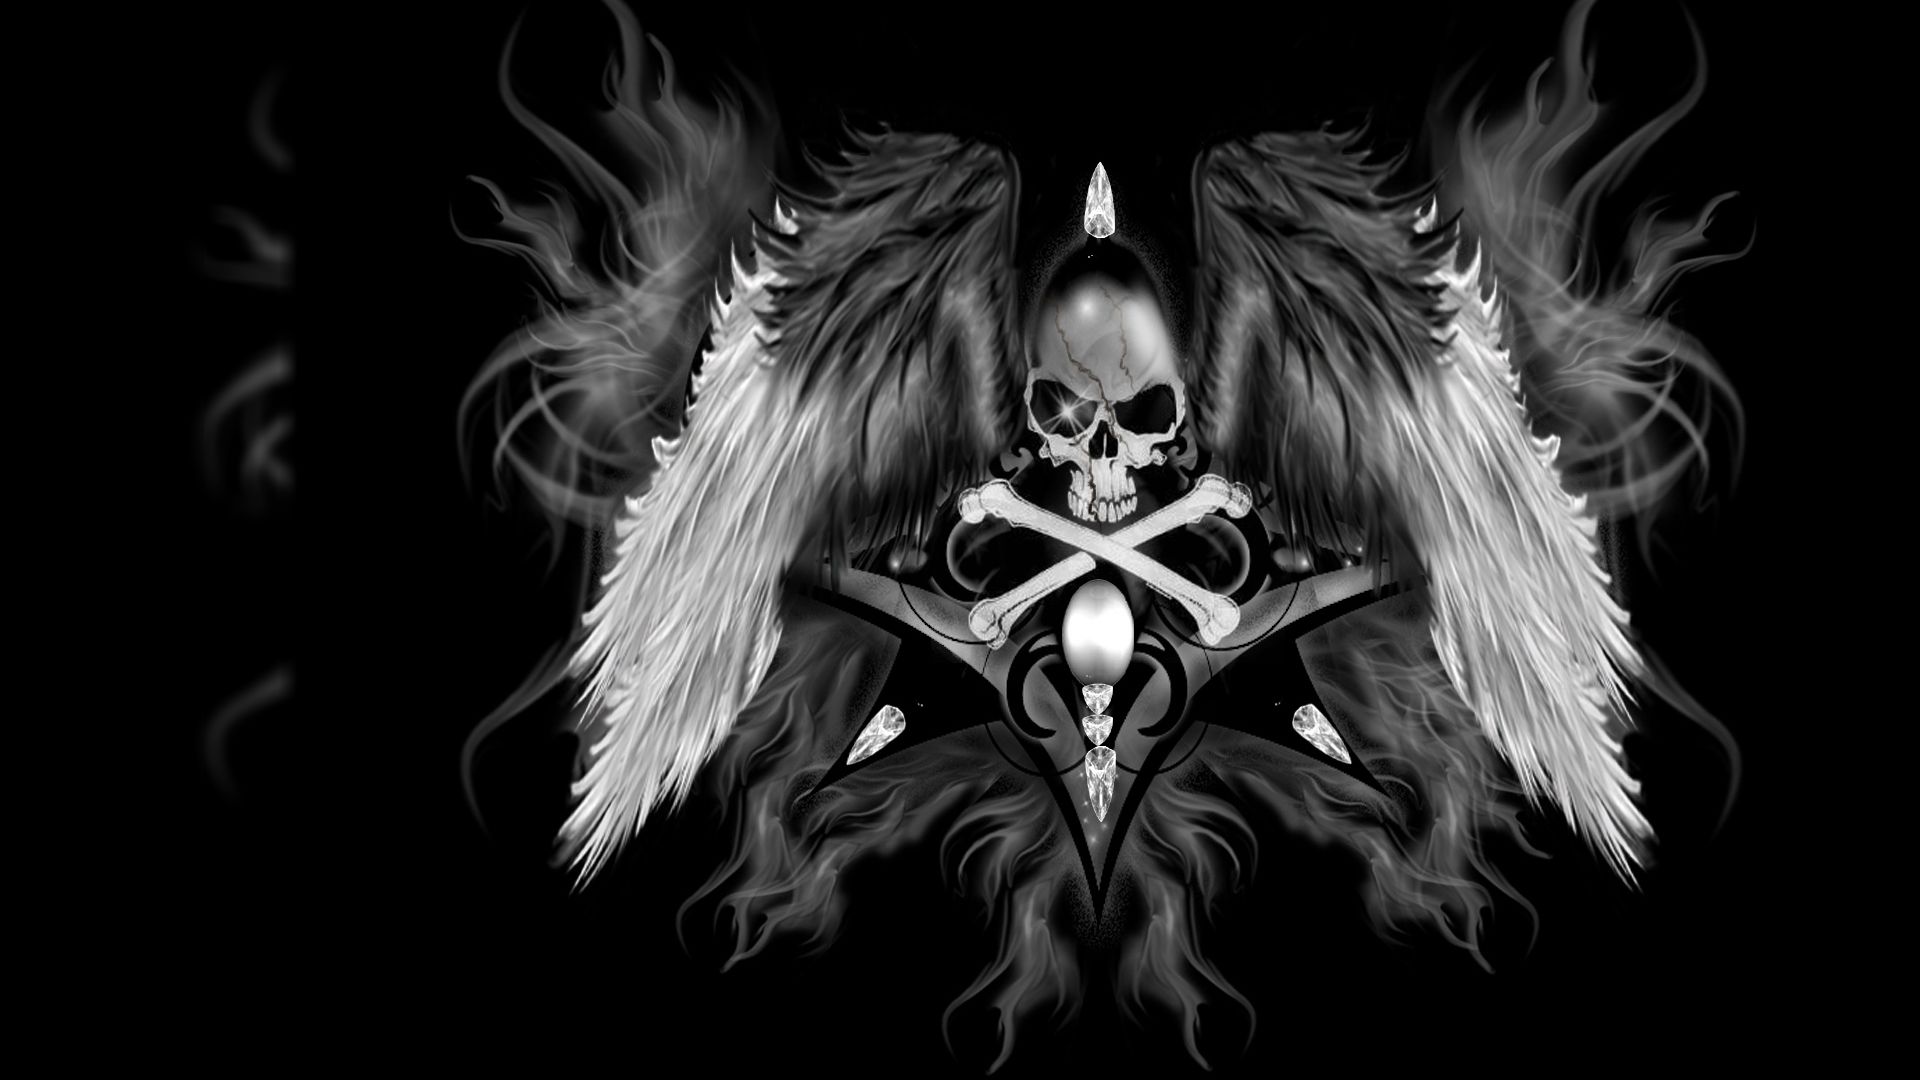 Hd Skull Wallpapers - Wallpapers High Definition